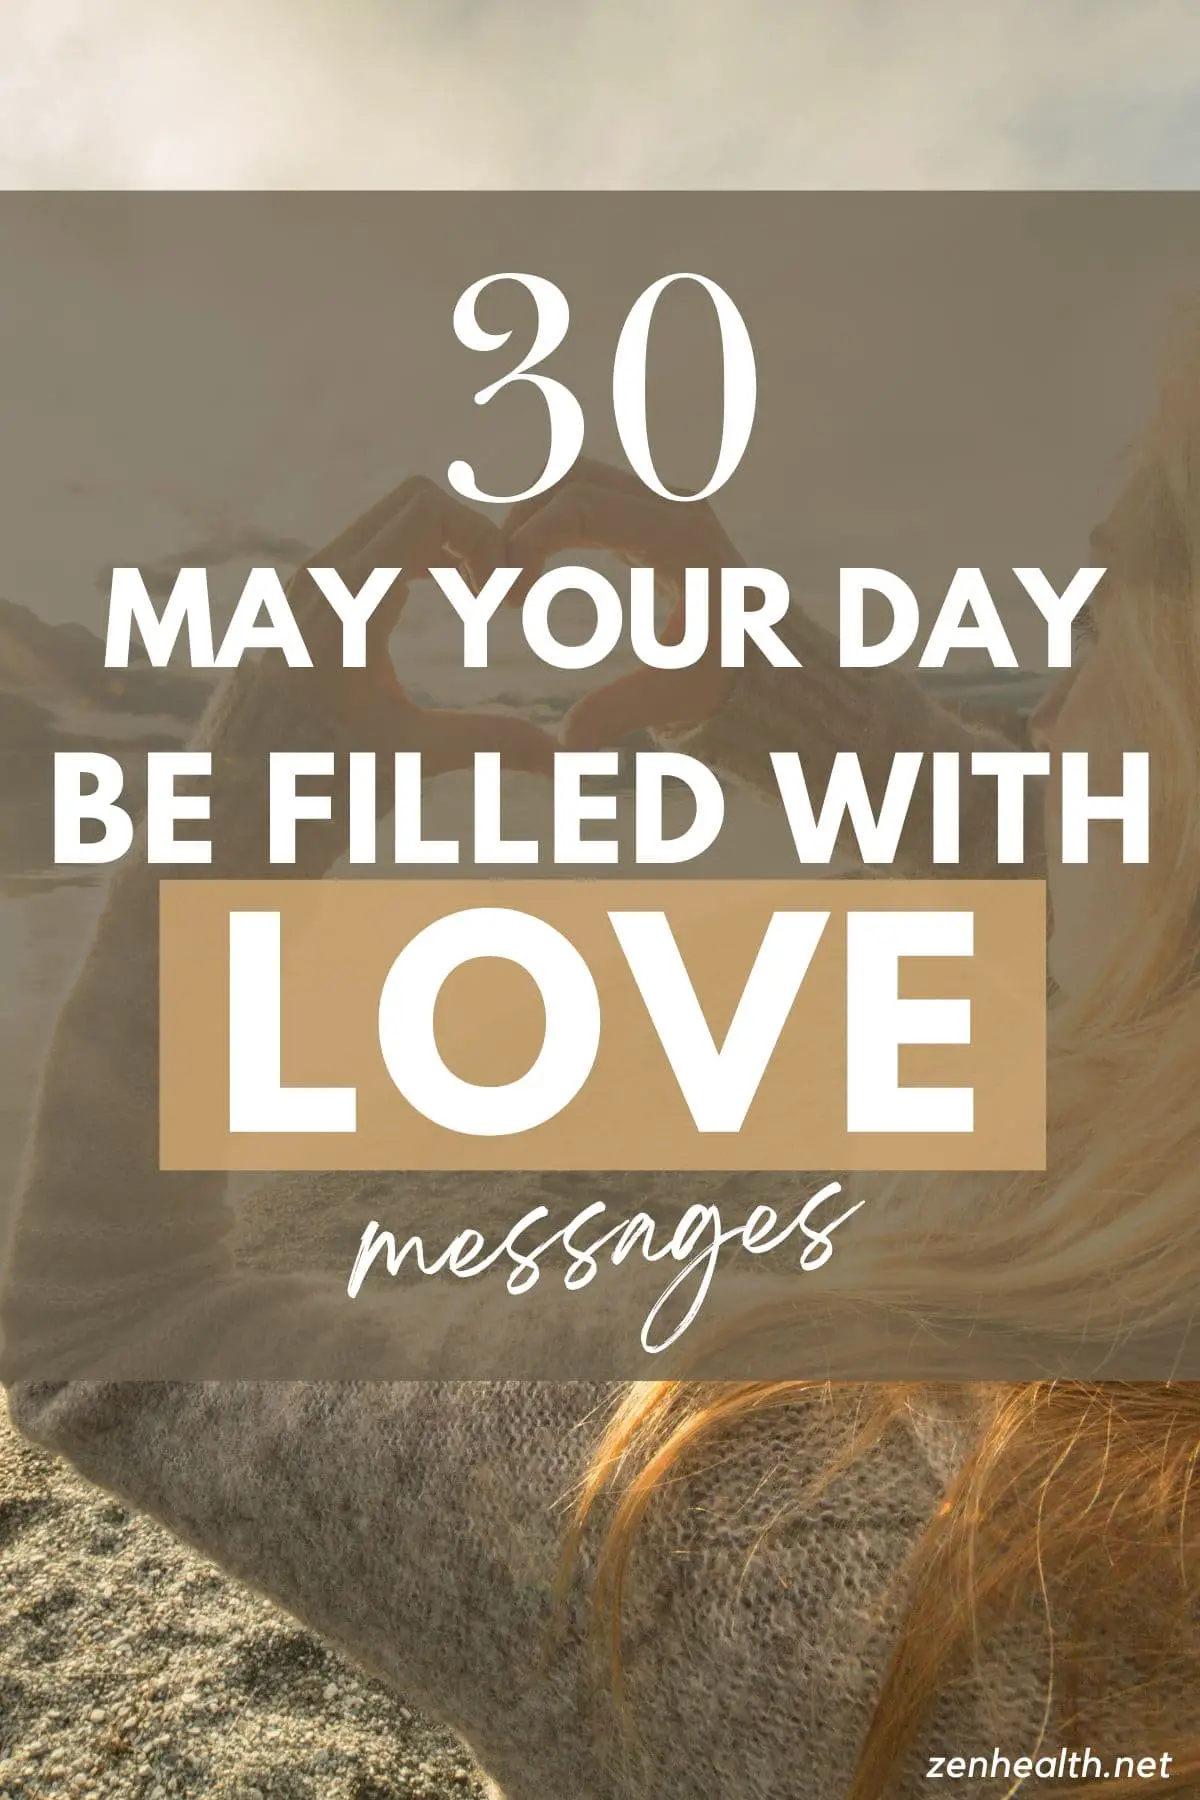 30 may your day be filled with love messages text overlay on a blonde woman holding her palms in the shape of a heart